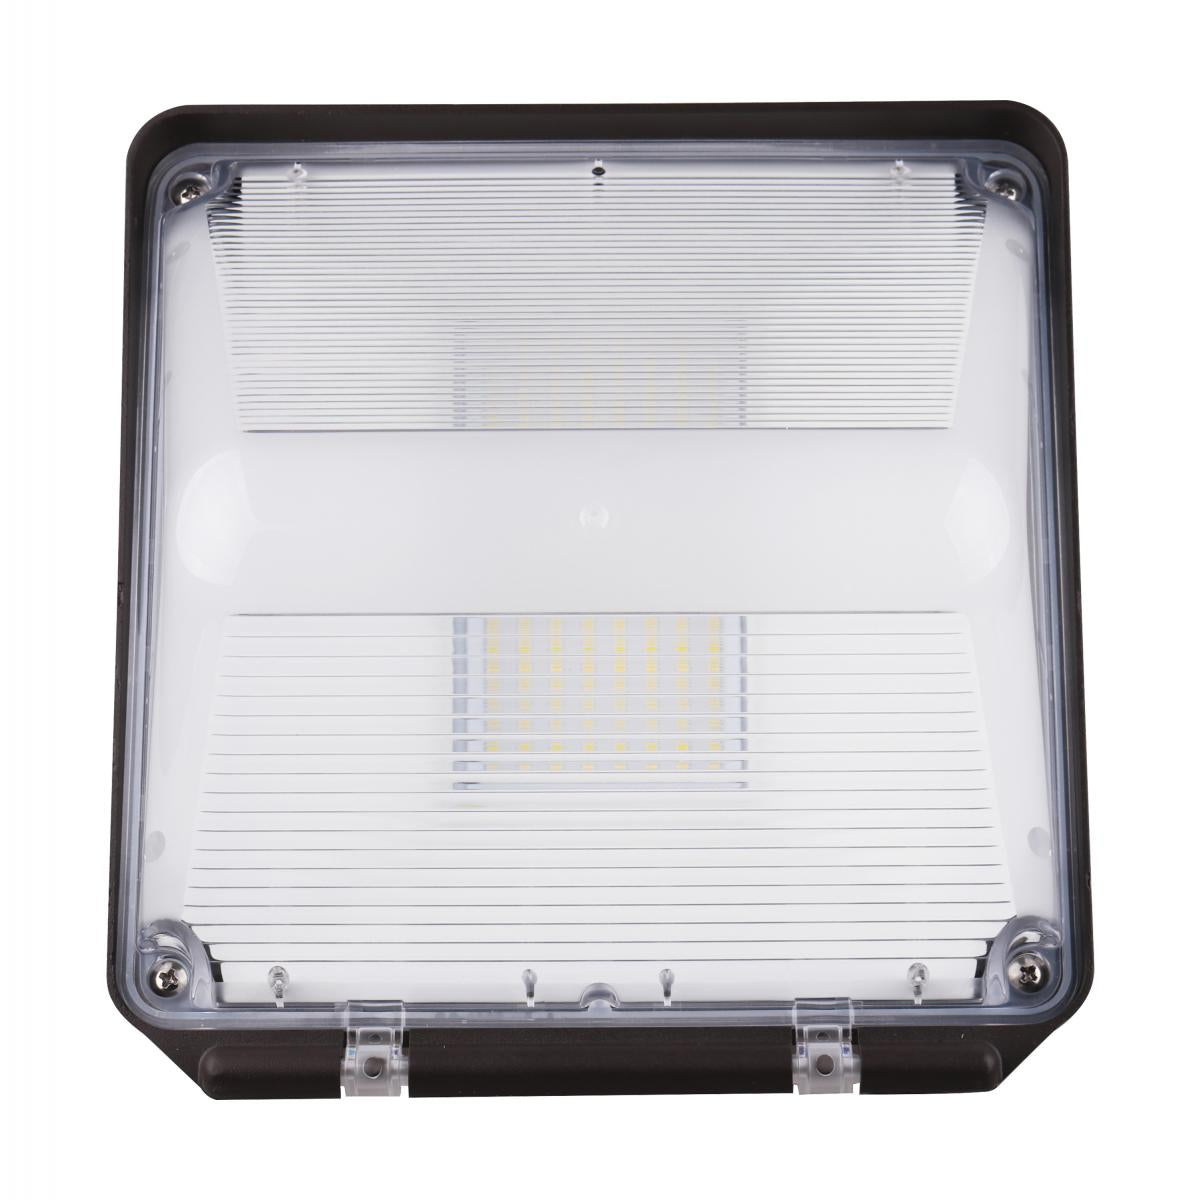 Satco 65-656 40W LED SMALL WALL PACK